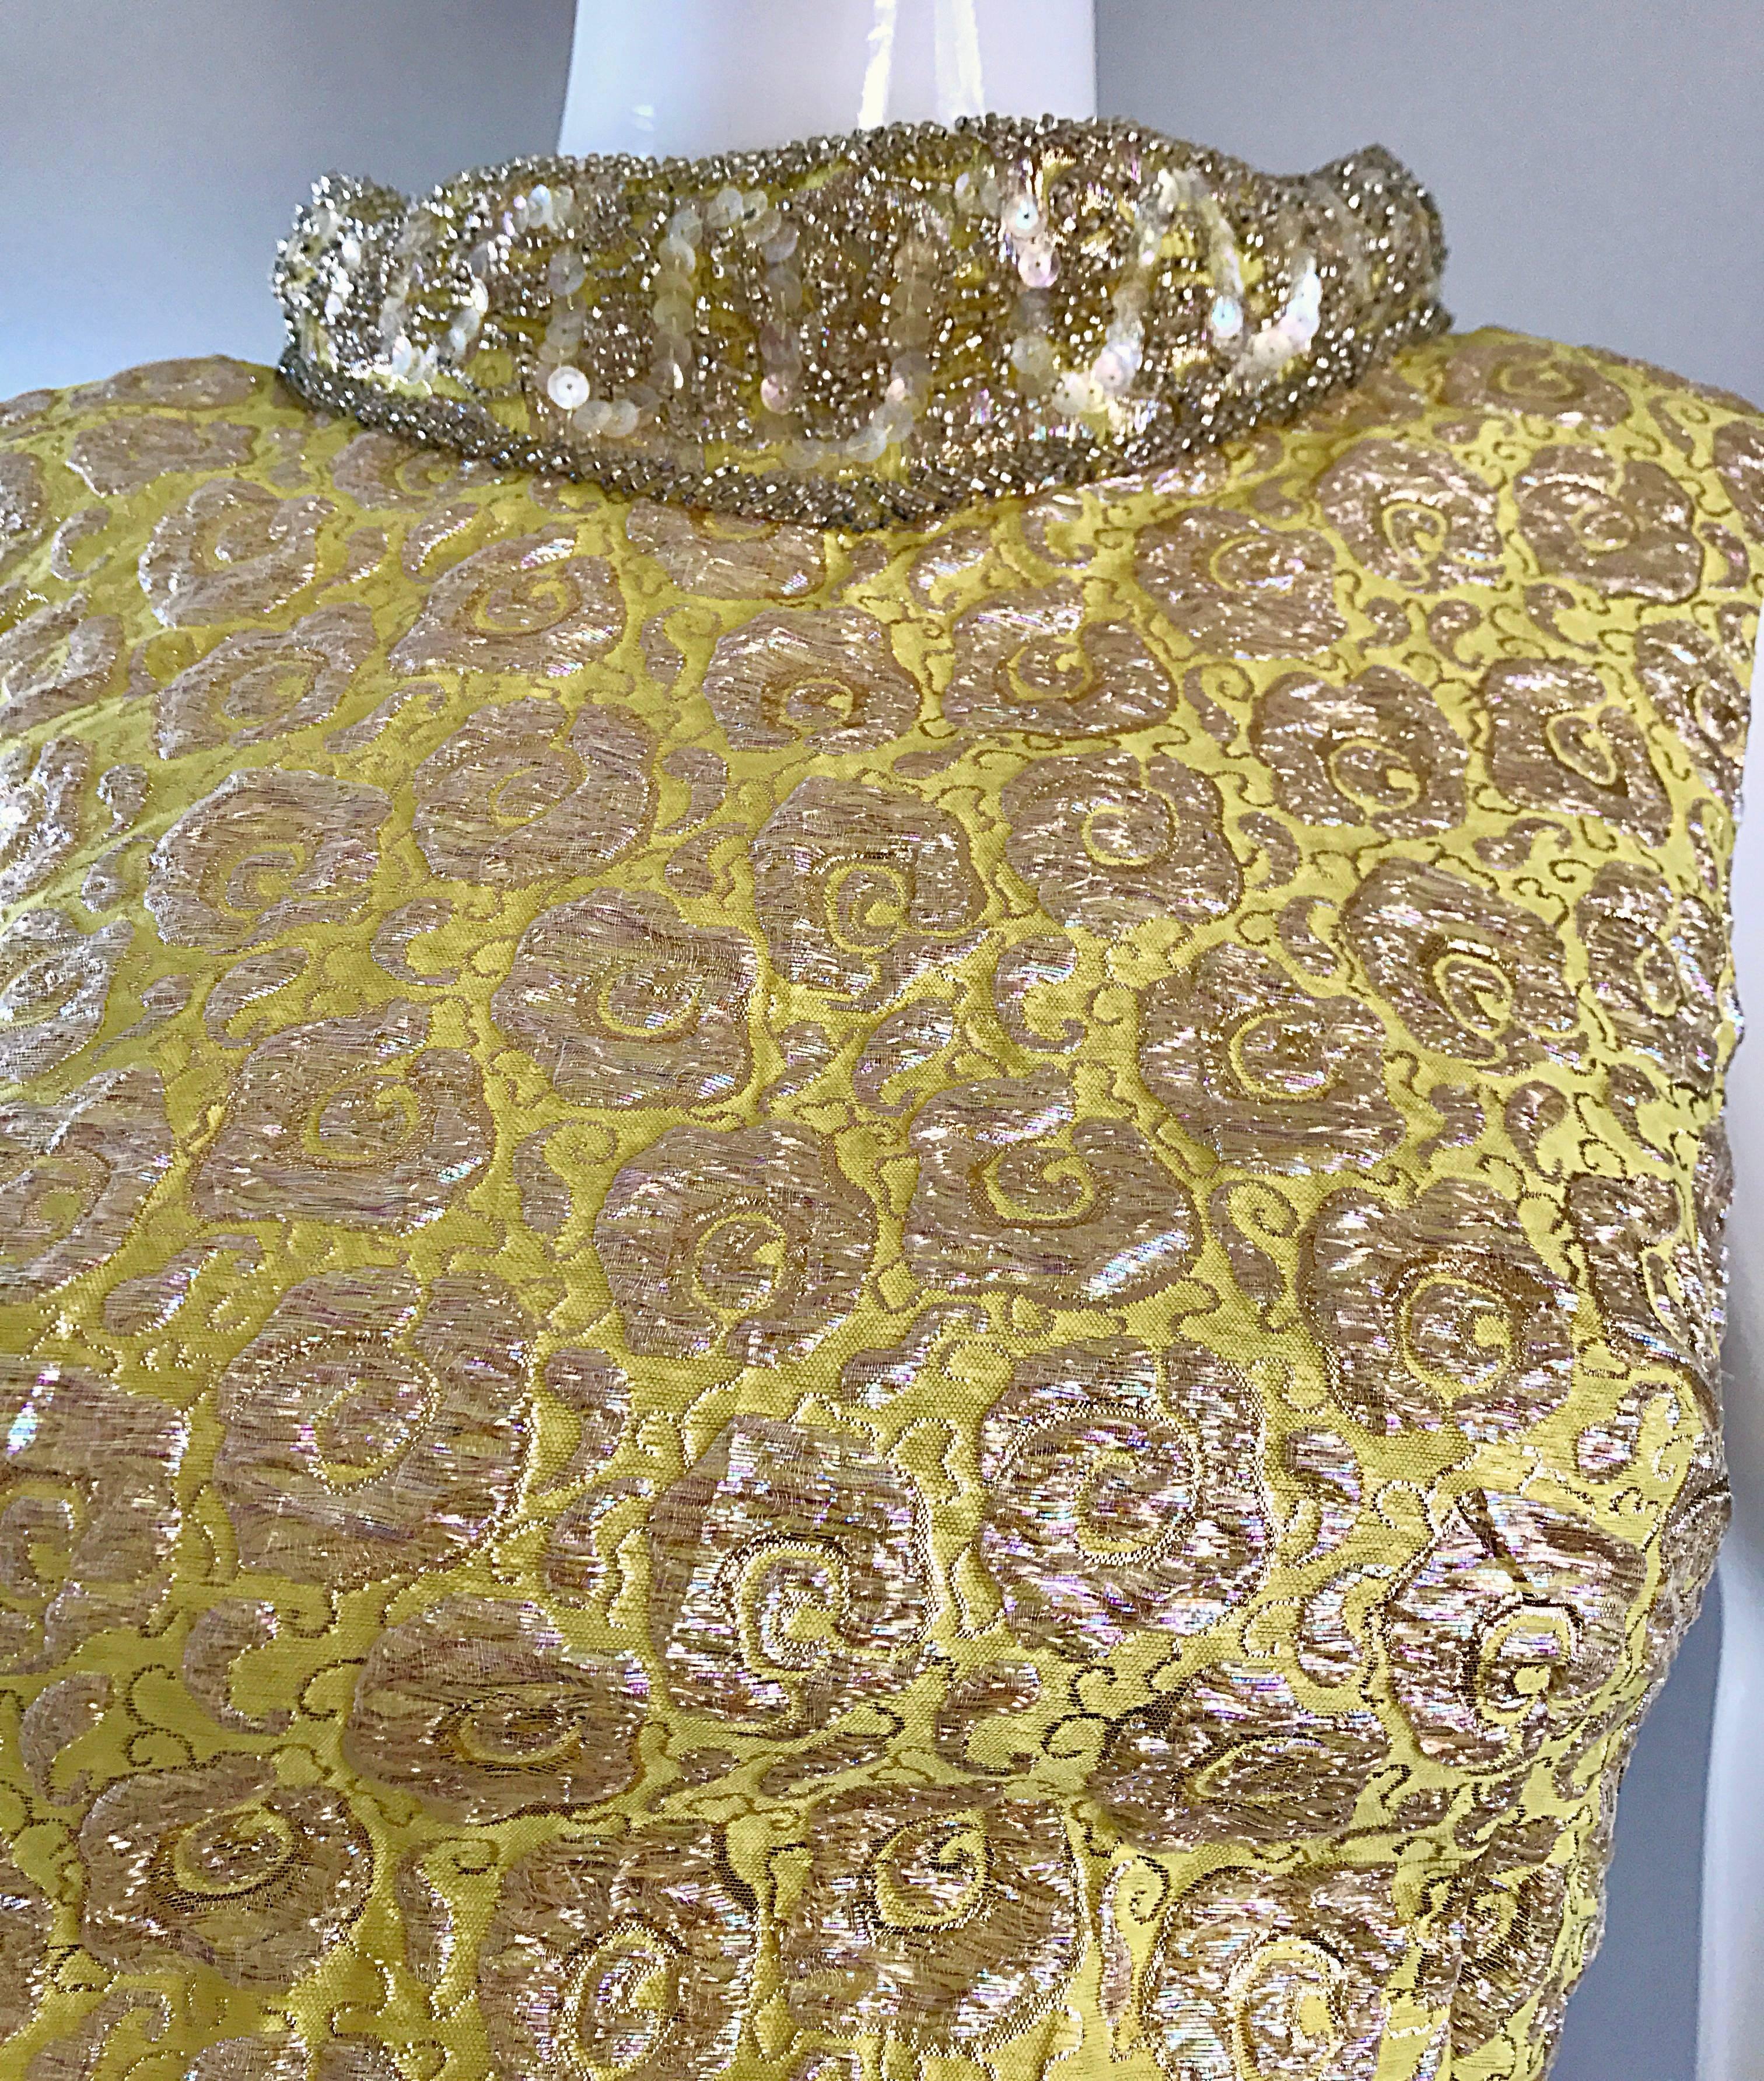 Women's Sensational 1950s Demi Couture Yellow Beaded Silk Brocade Vintage Mermaid Gown For Sale